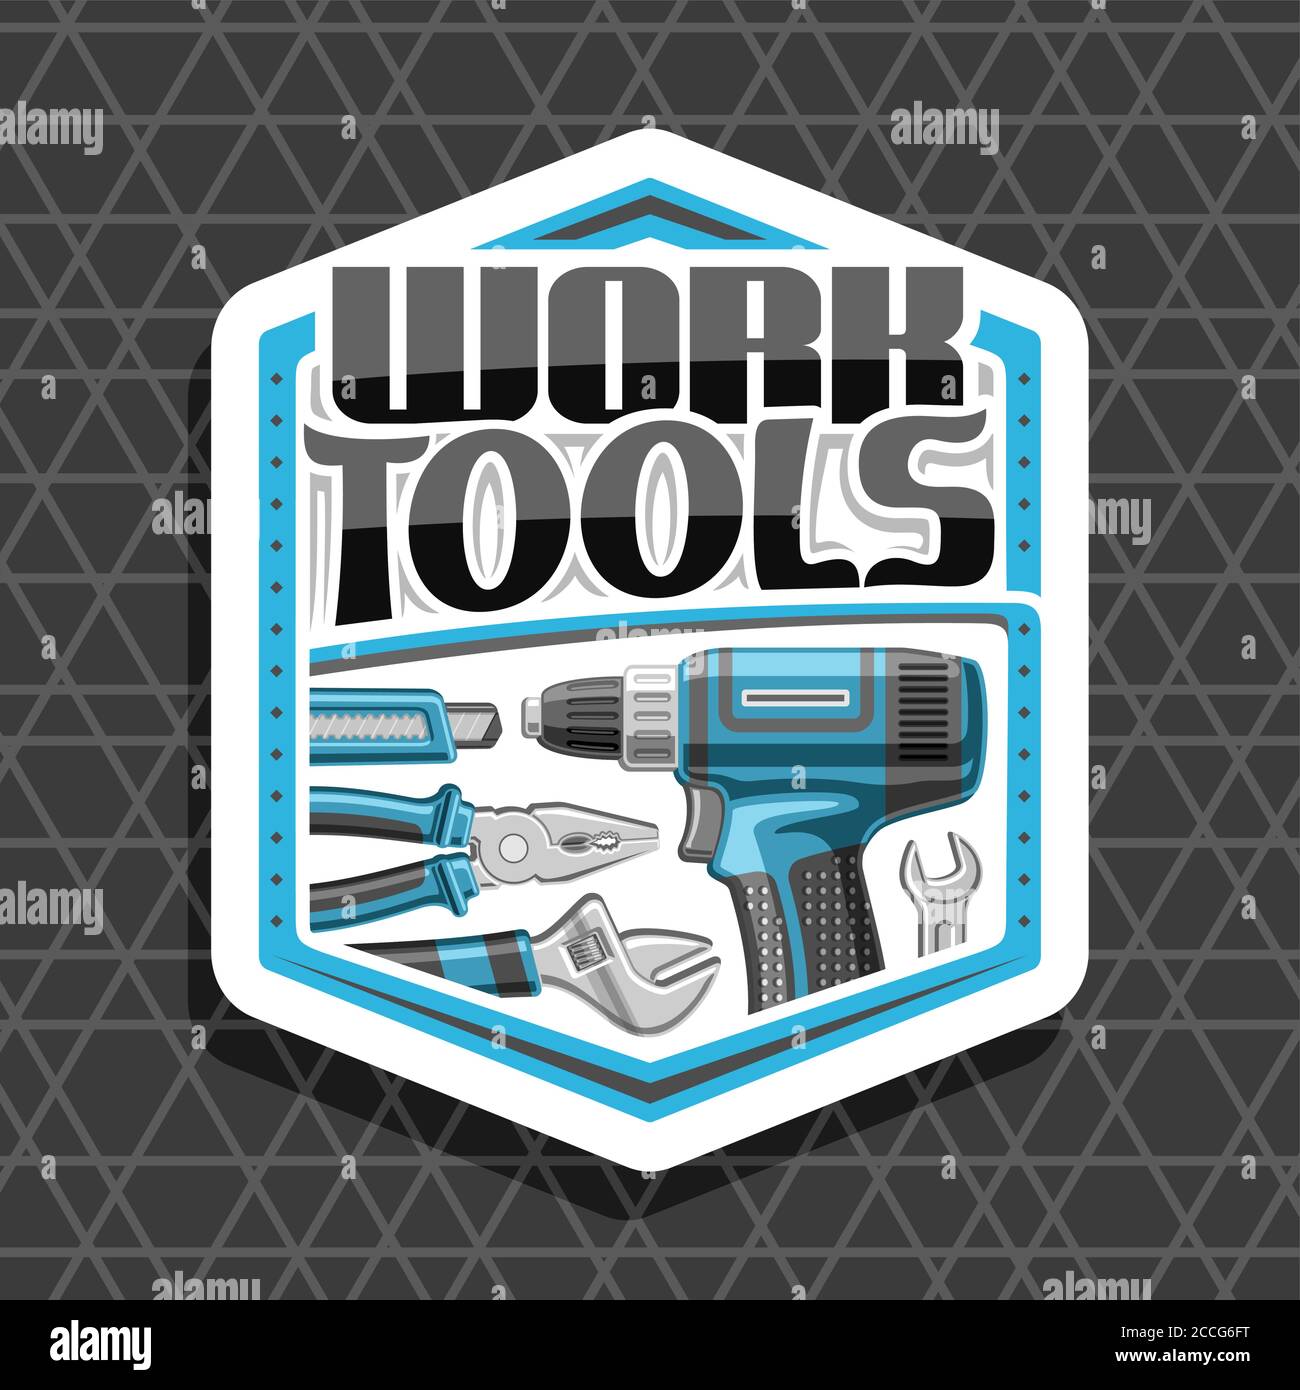 Vector logo for Work Tools, white decorative badge with illustration of various steel work tools for labor day, repair concept with unique letters for Stock Vector